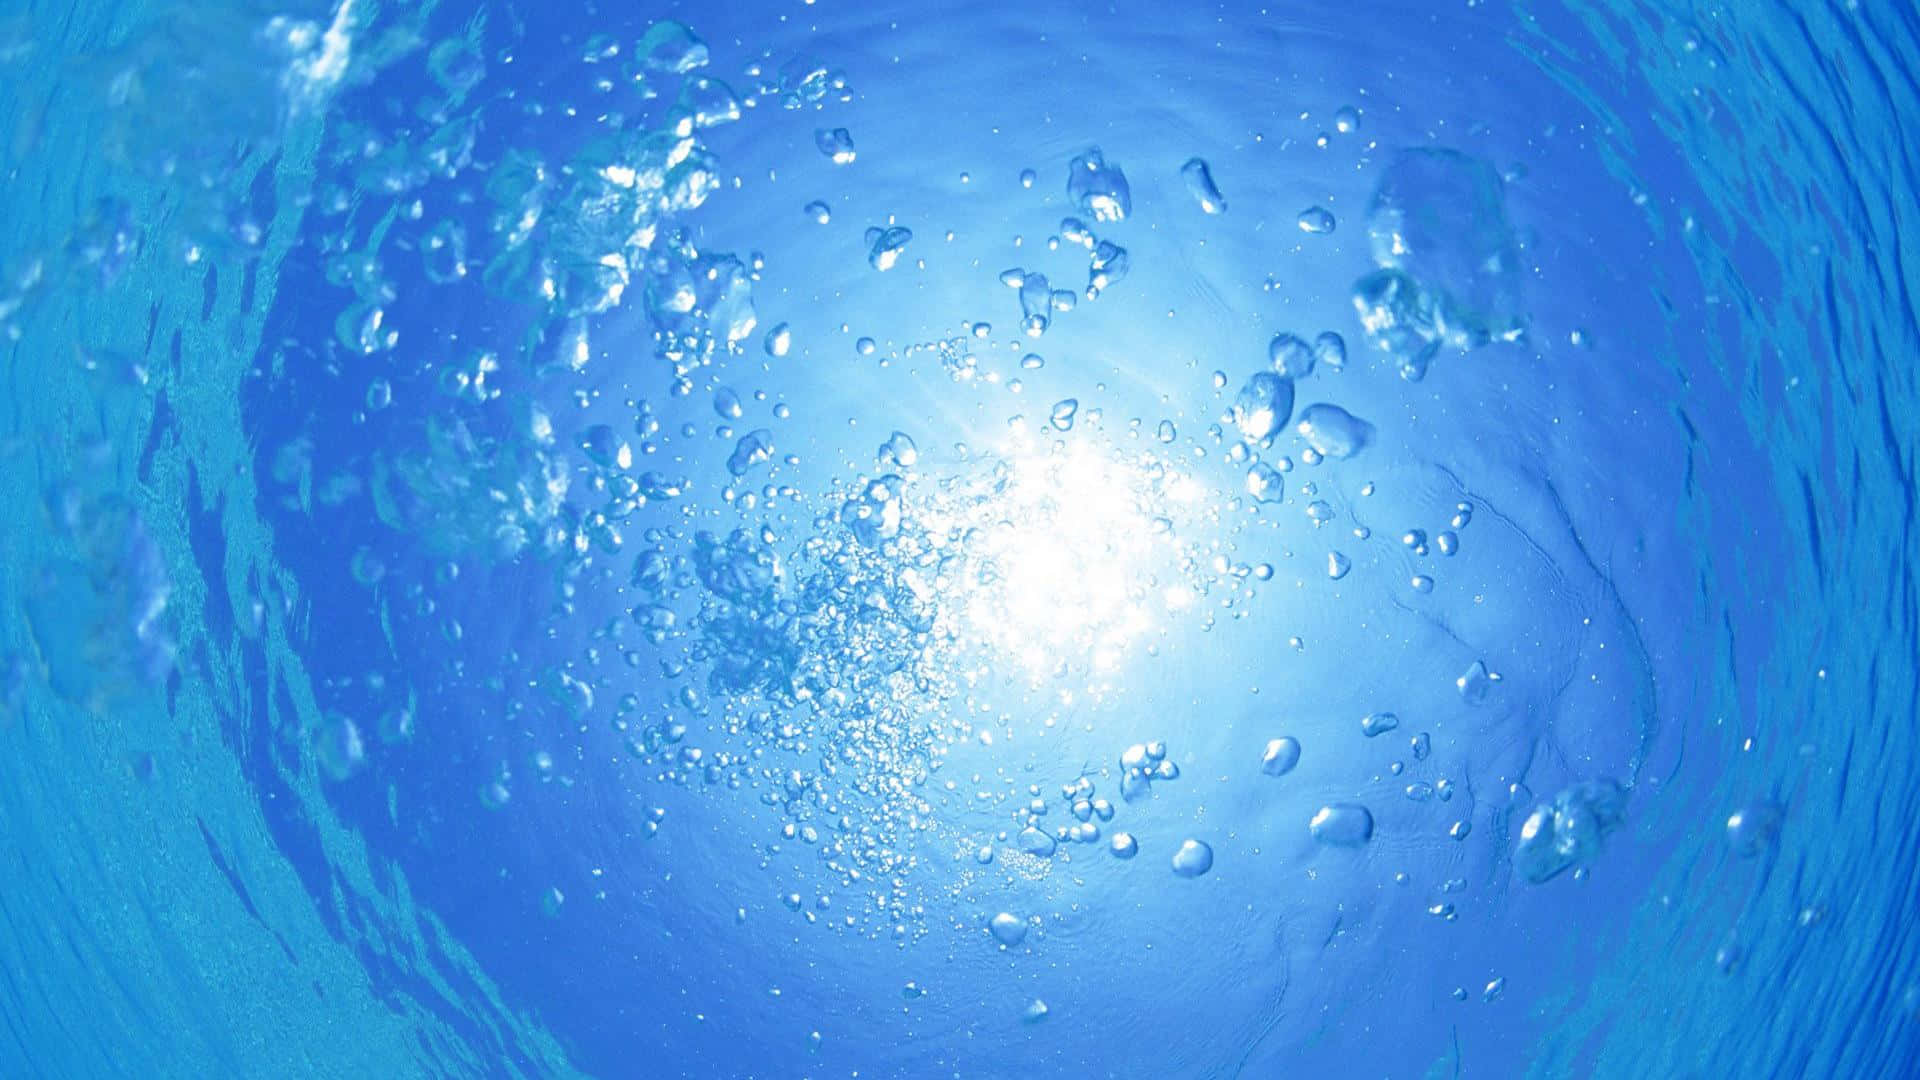 A Blue Water Surface With Bubbles And Bubbles